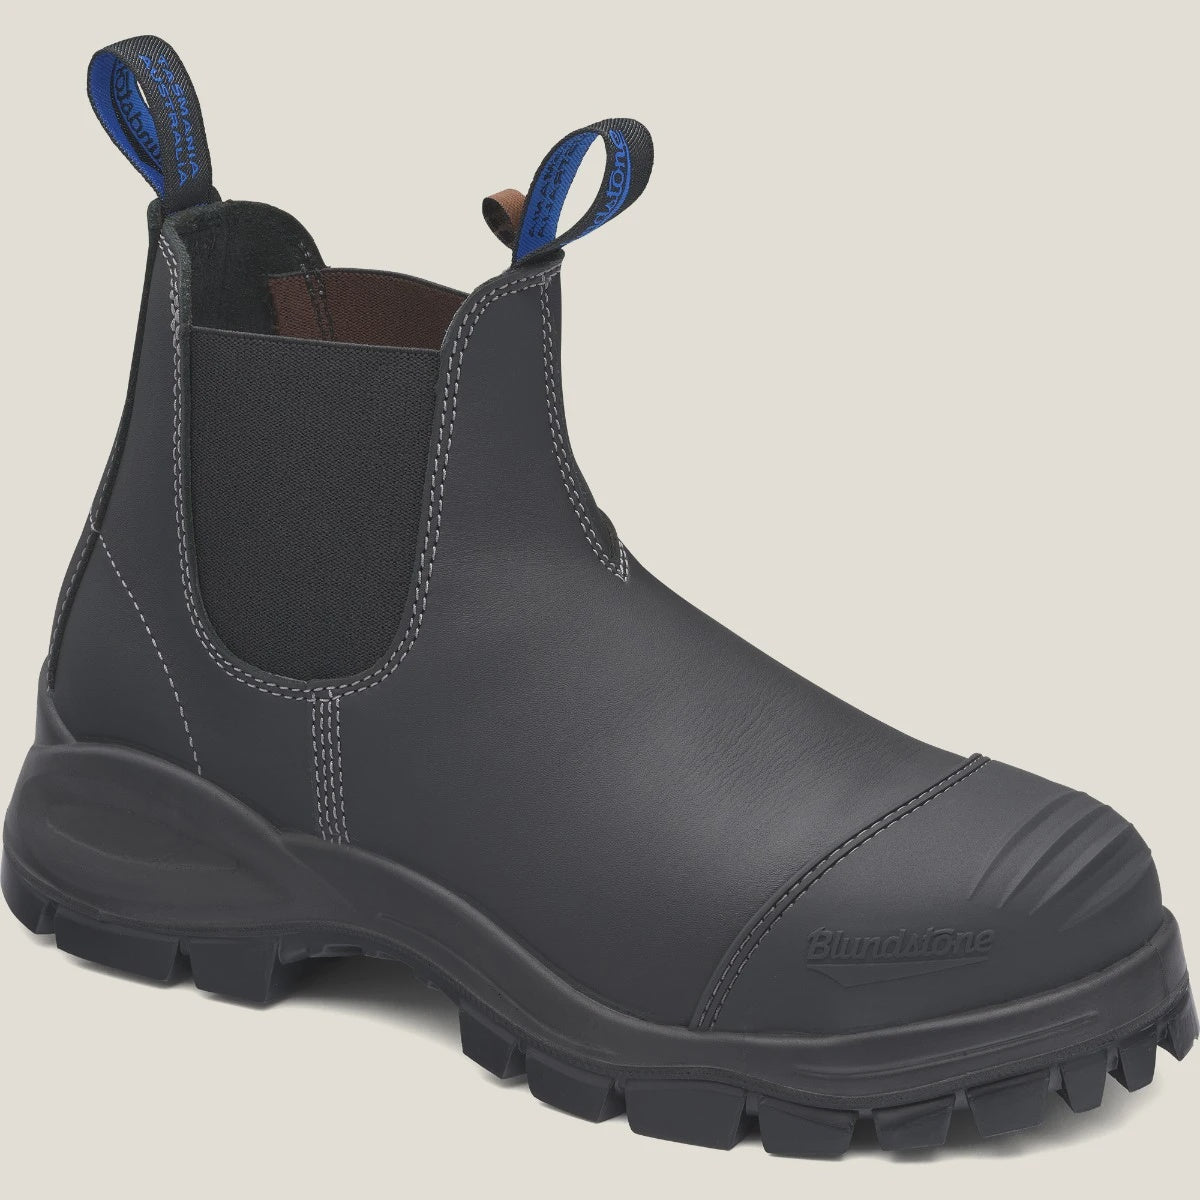 Blundstone - 990 Elastic Sided Safety Boot - Black